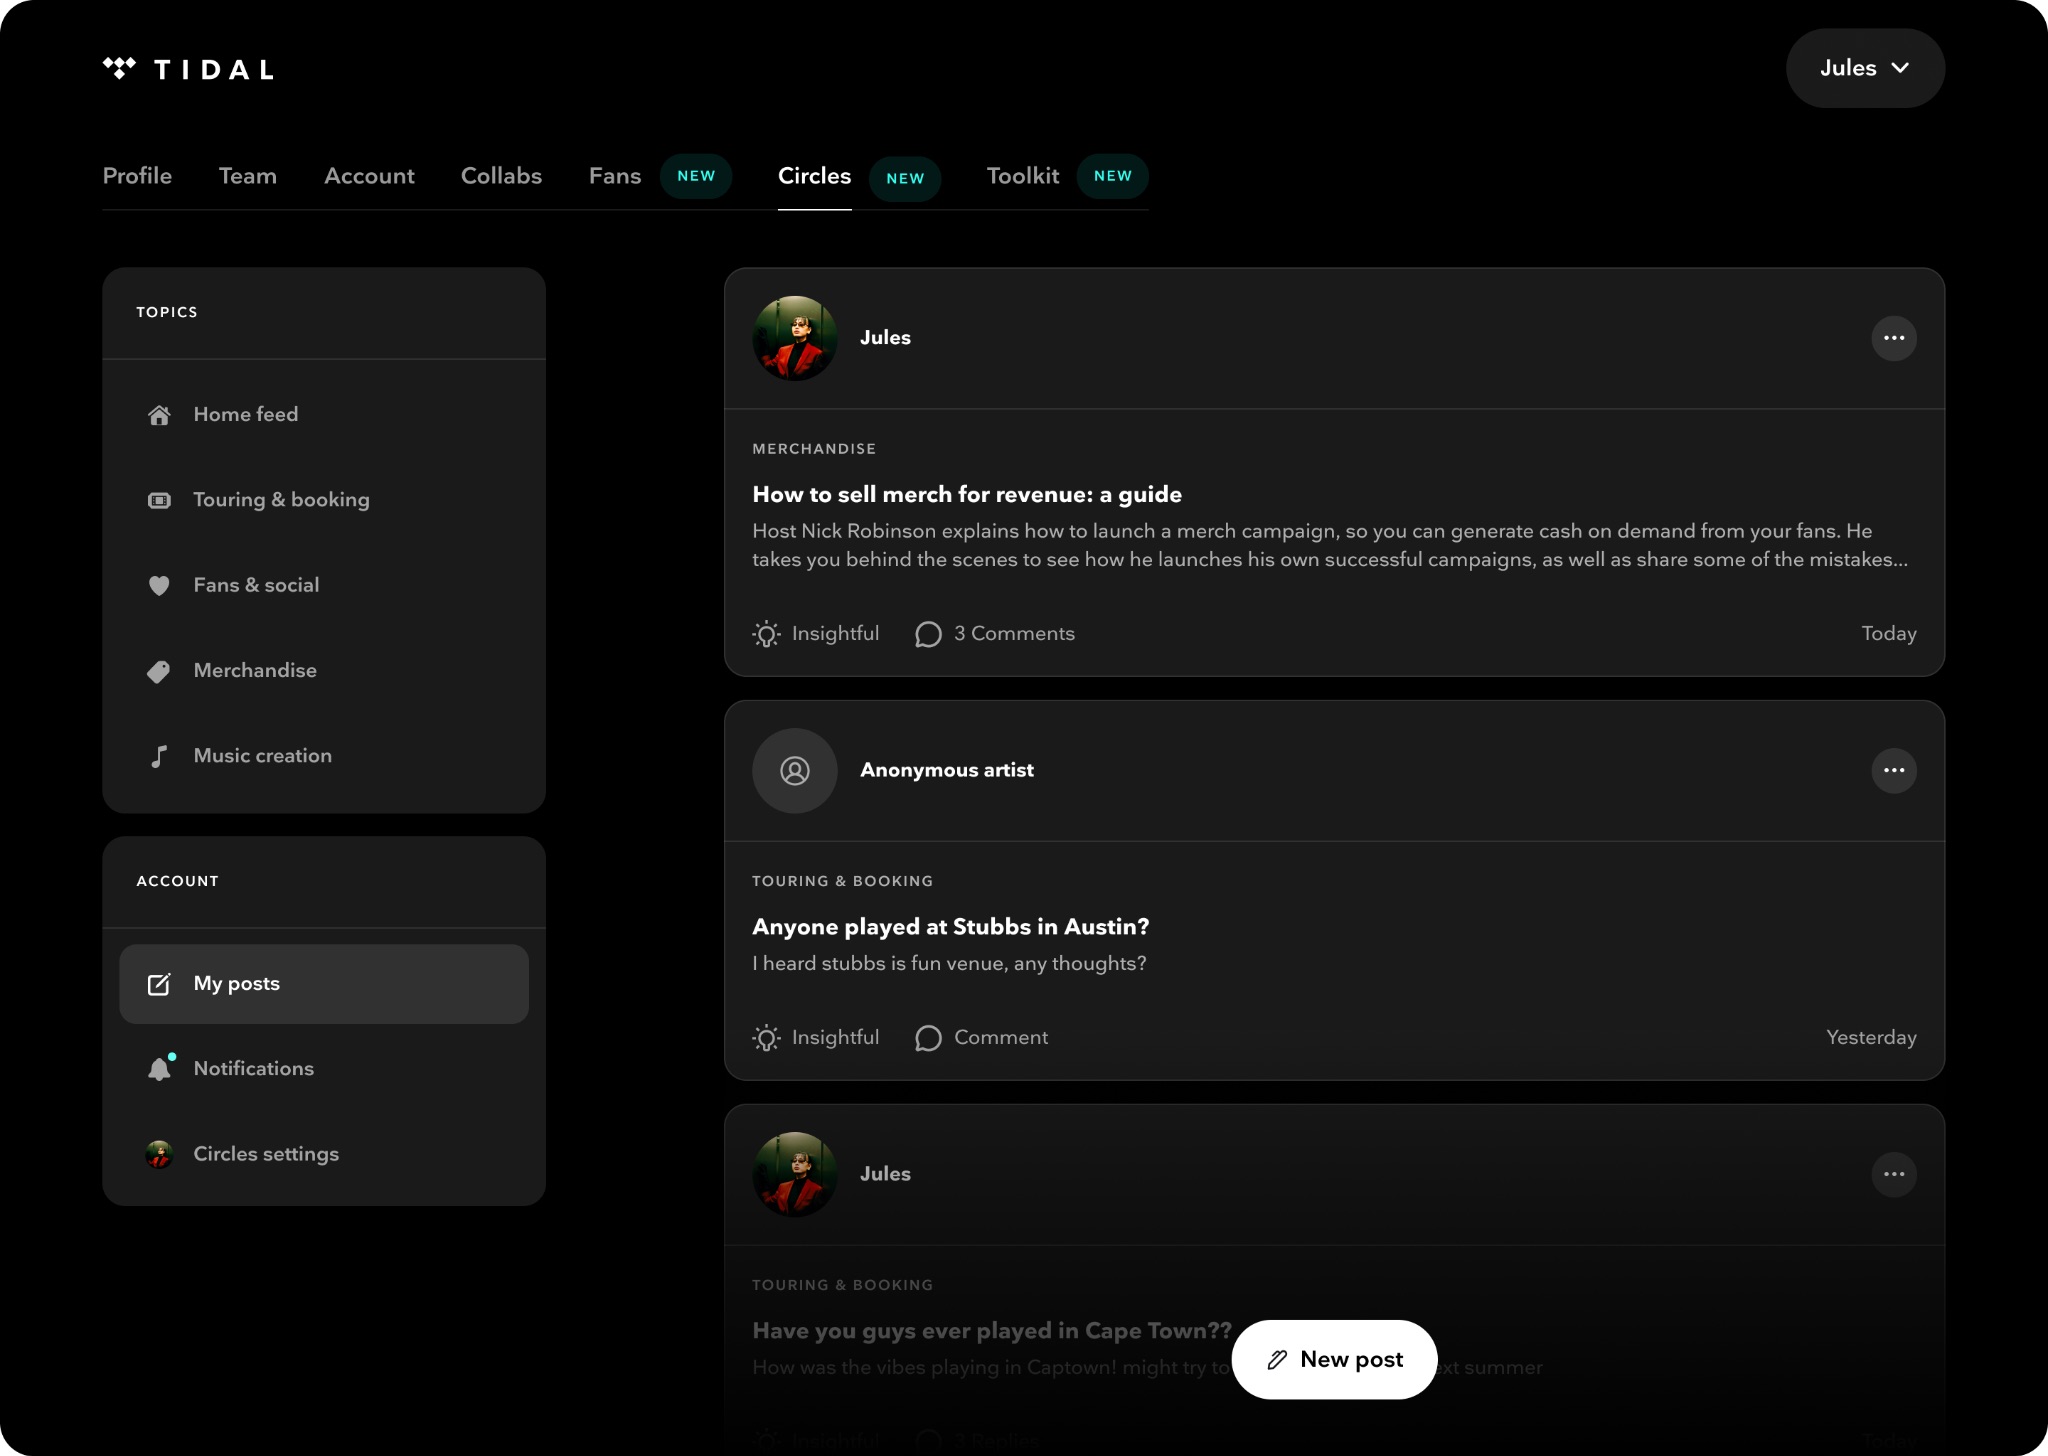 The new Circles page on TIDAL